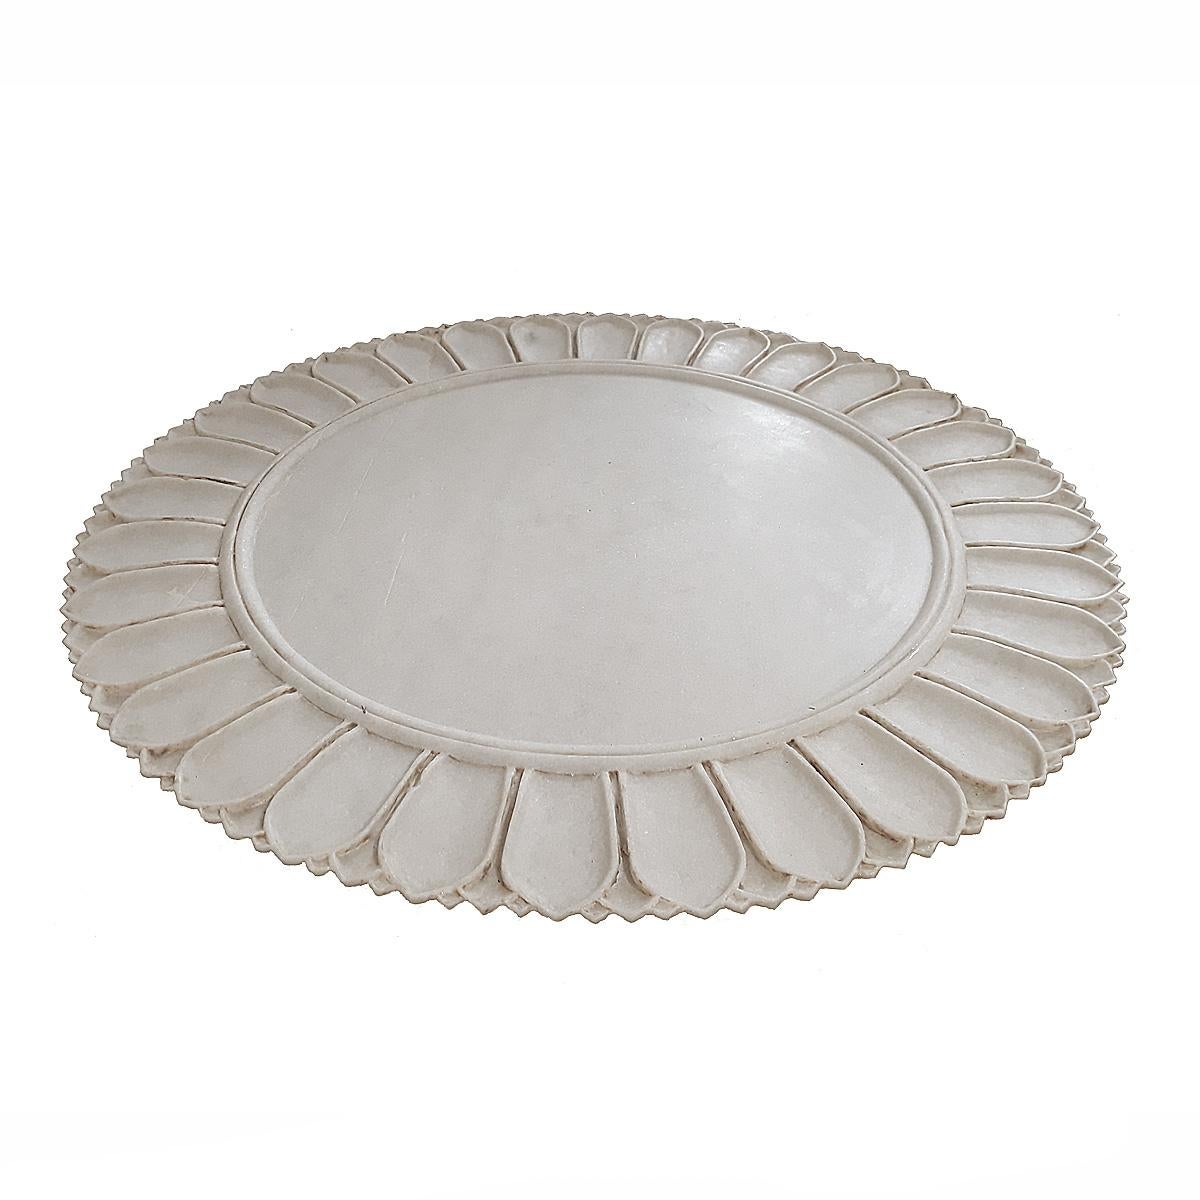 A hand-carved marble charger from India, circa 1980. 
Measures: 21 inches in diameter, half an inch high. 
Can be used as a charger, as a centerpiece or as a serving tray.